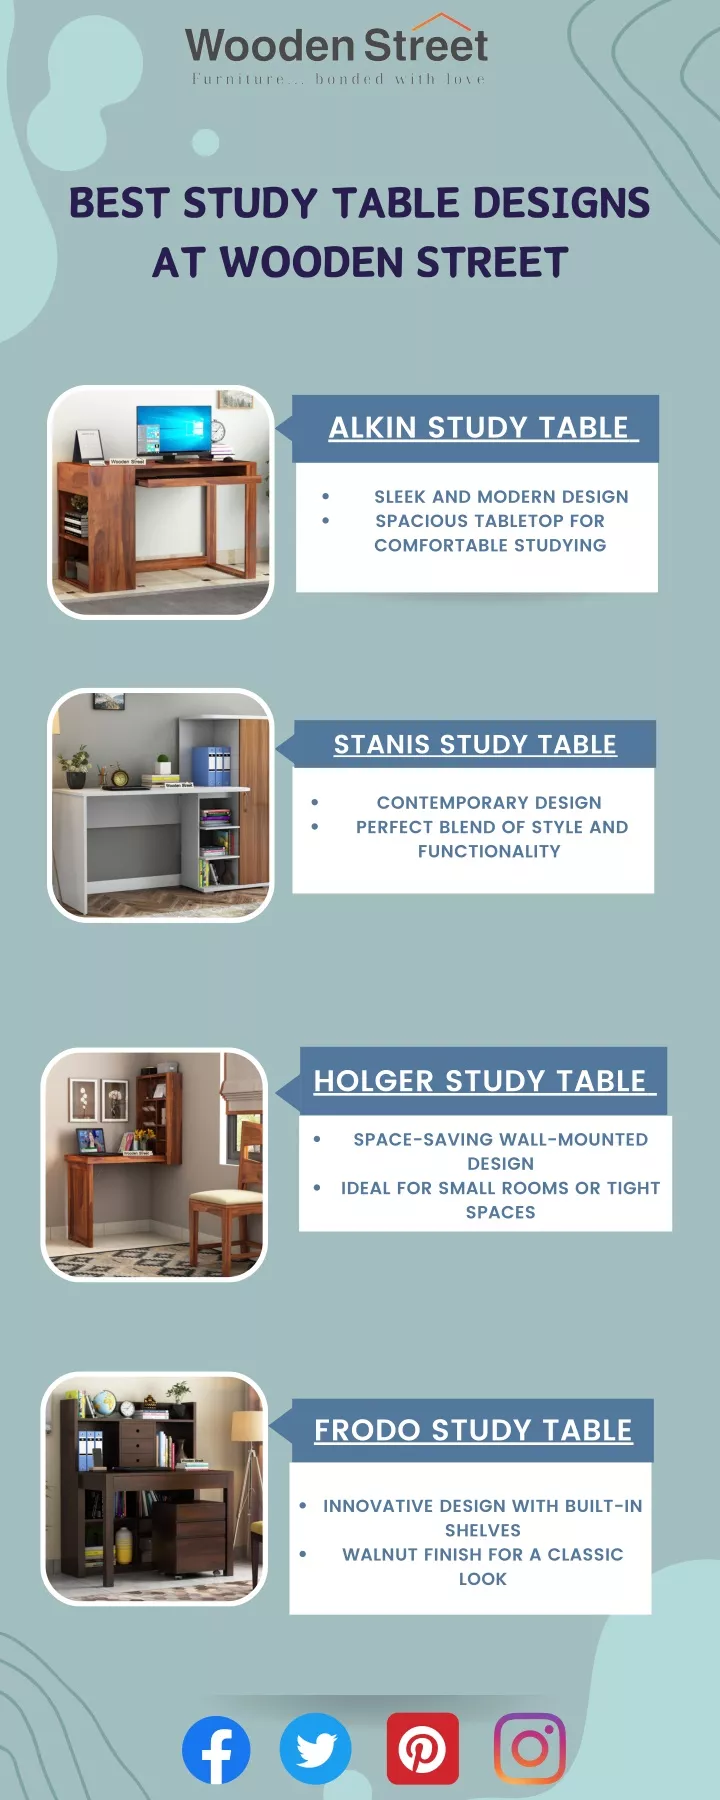 best study table designs at wooden street